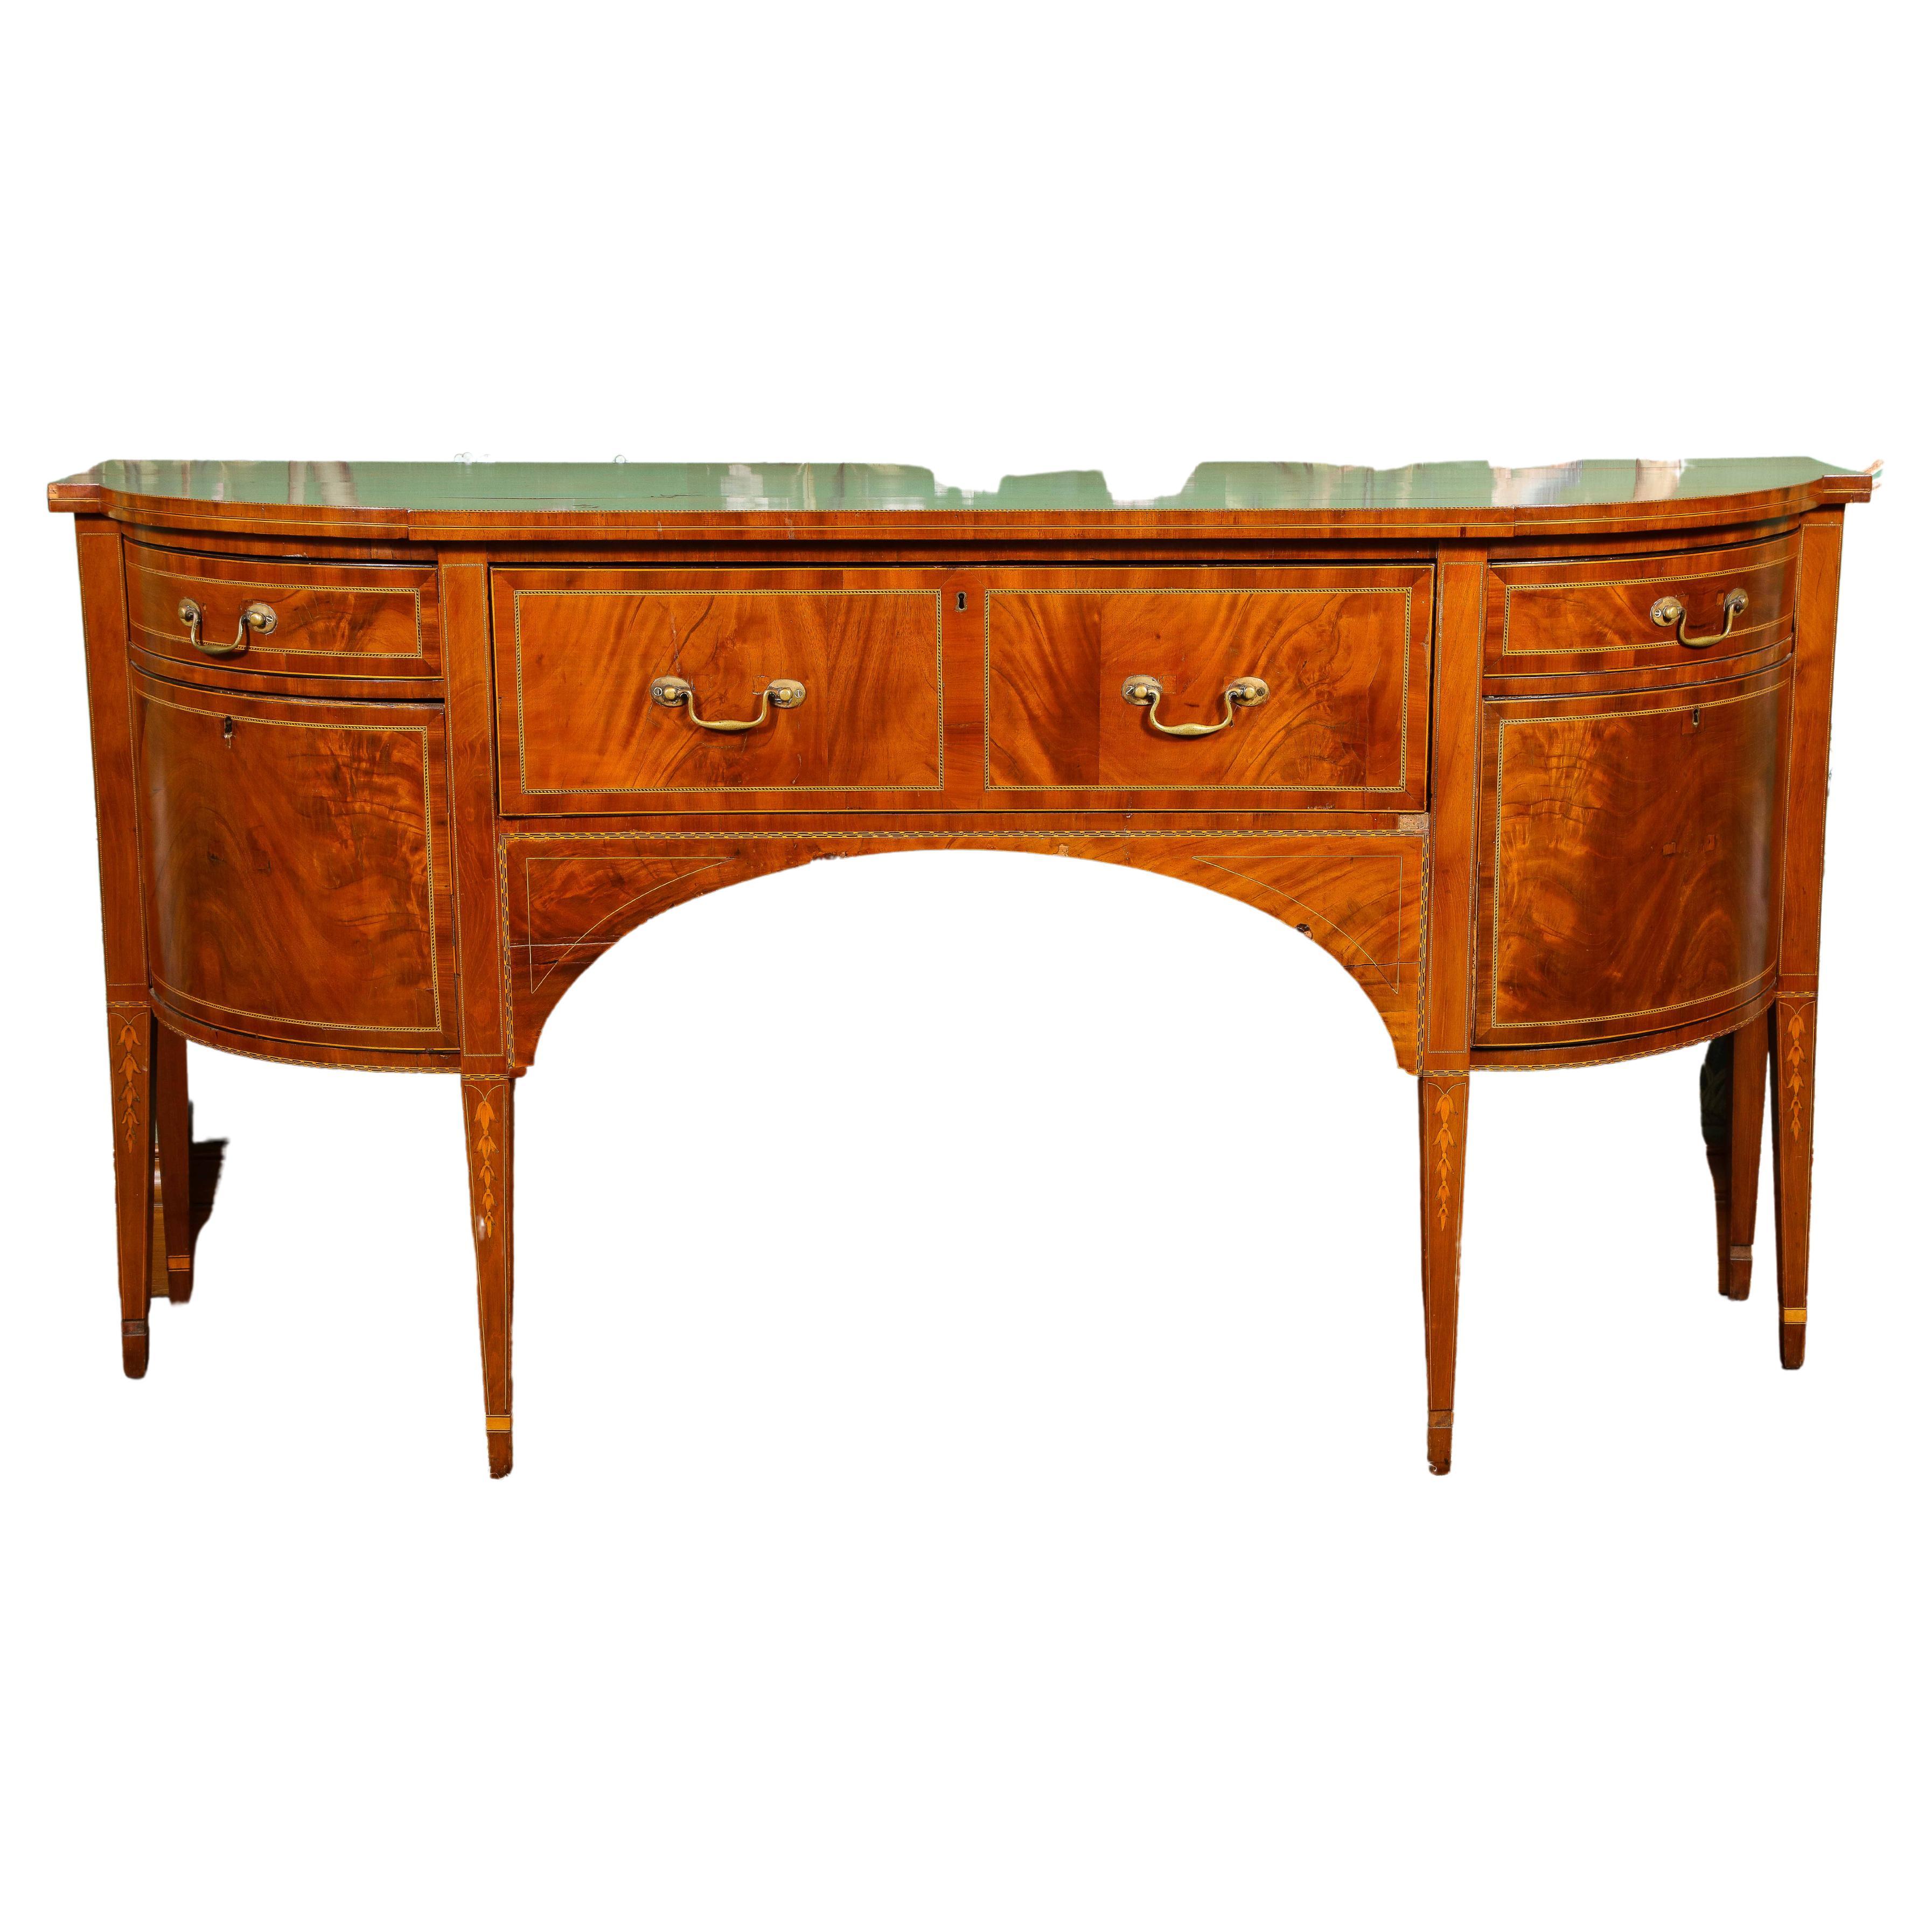 19th Century George III style parquetry inlaid bowfront mahogany buffet or sideboard. Center drawer with two rounded cellarette side cabinets with small drawers above. Stands firmly on six square tapered legs. Key included, functions but is a little